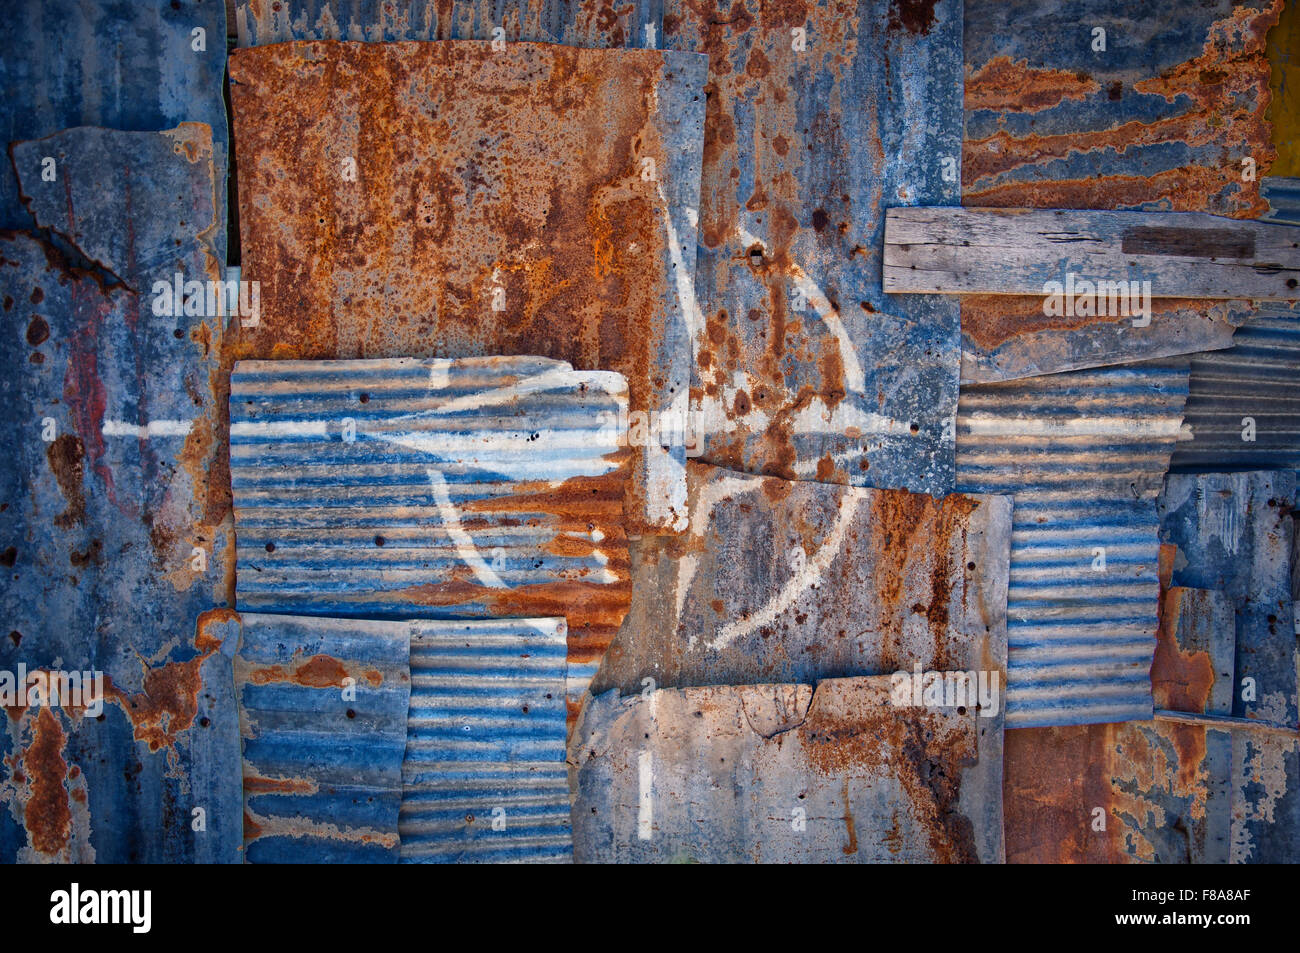 An abstract background image of the flag of NATO painted on to rusty corrugated iron sheets overlapping to form a wall or fence. Stock Photo